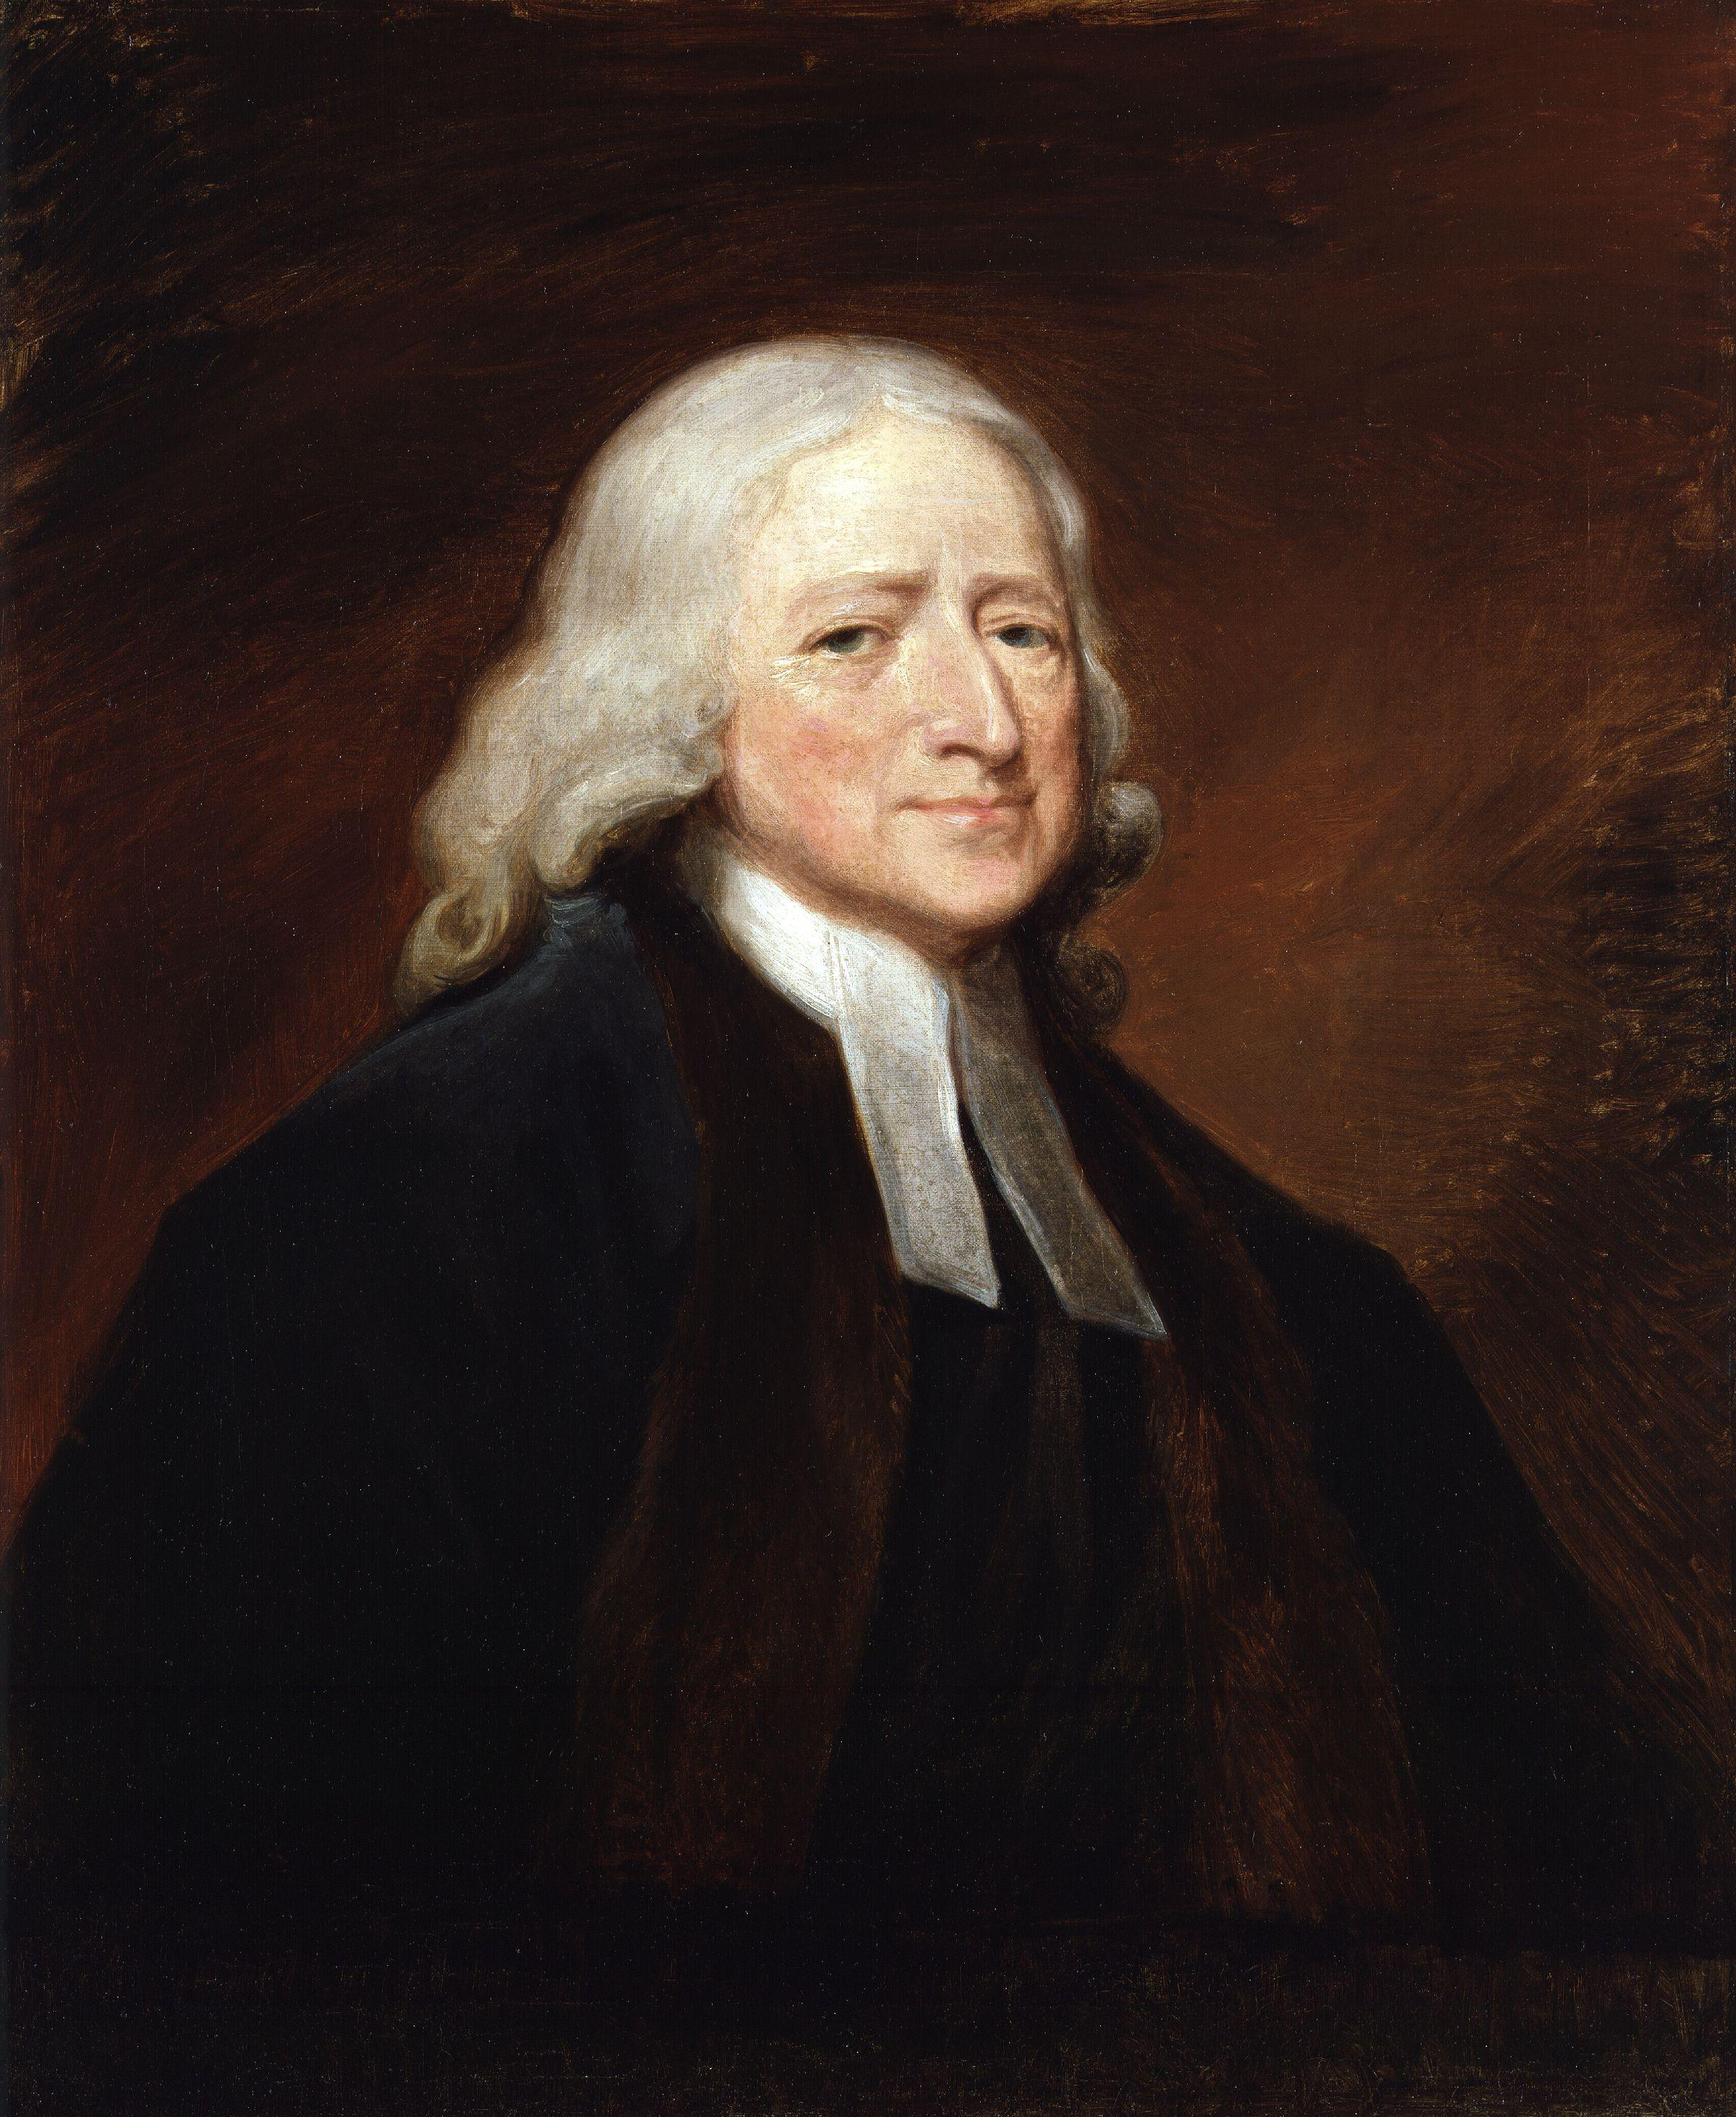 Portrait of John Wesley by George Romney. Painting of man with white hair and white collar. 